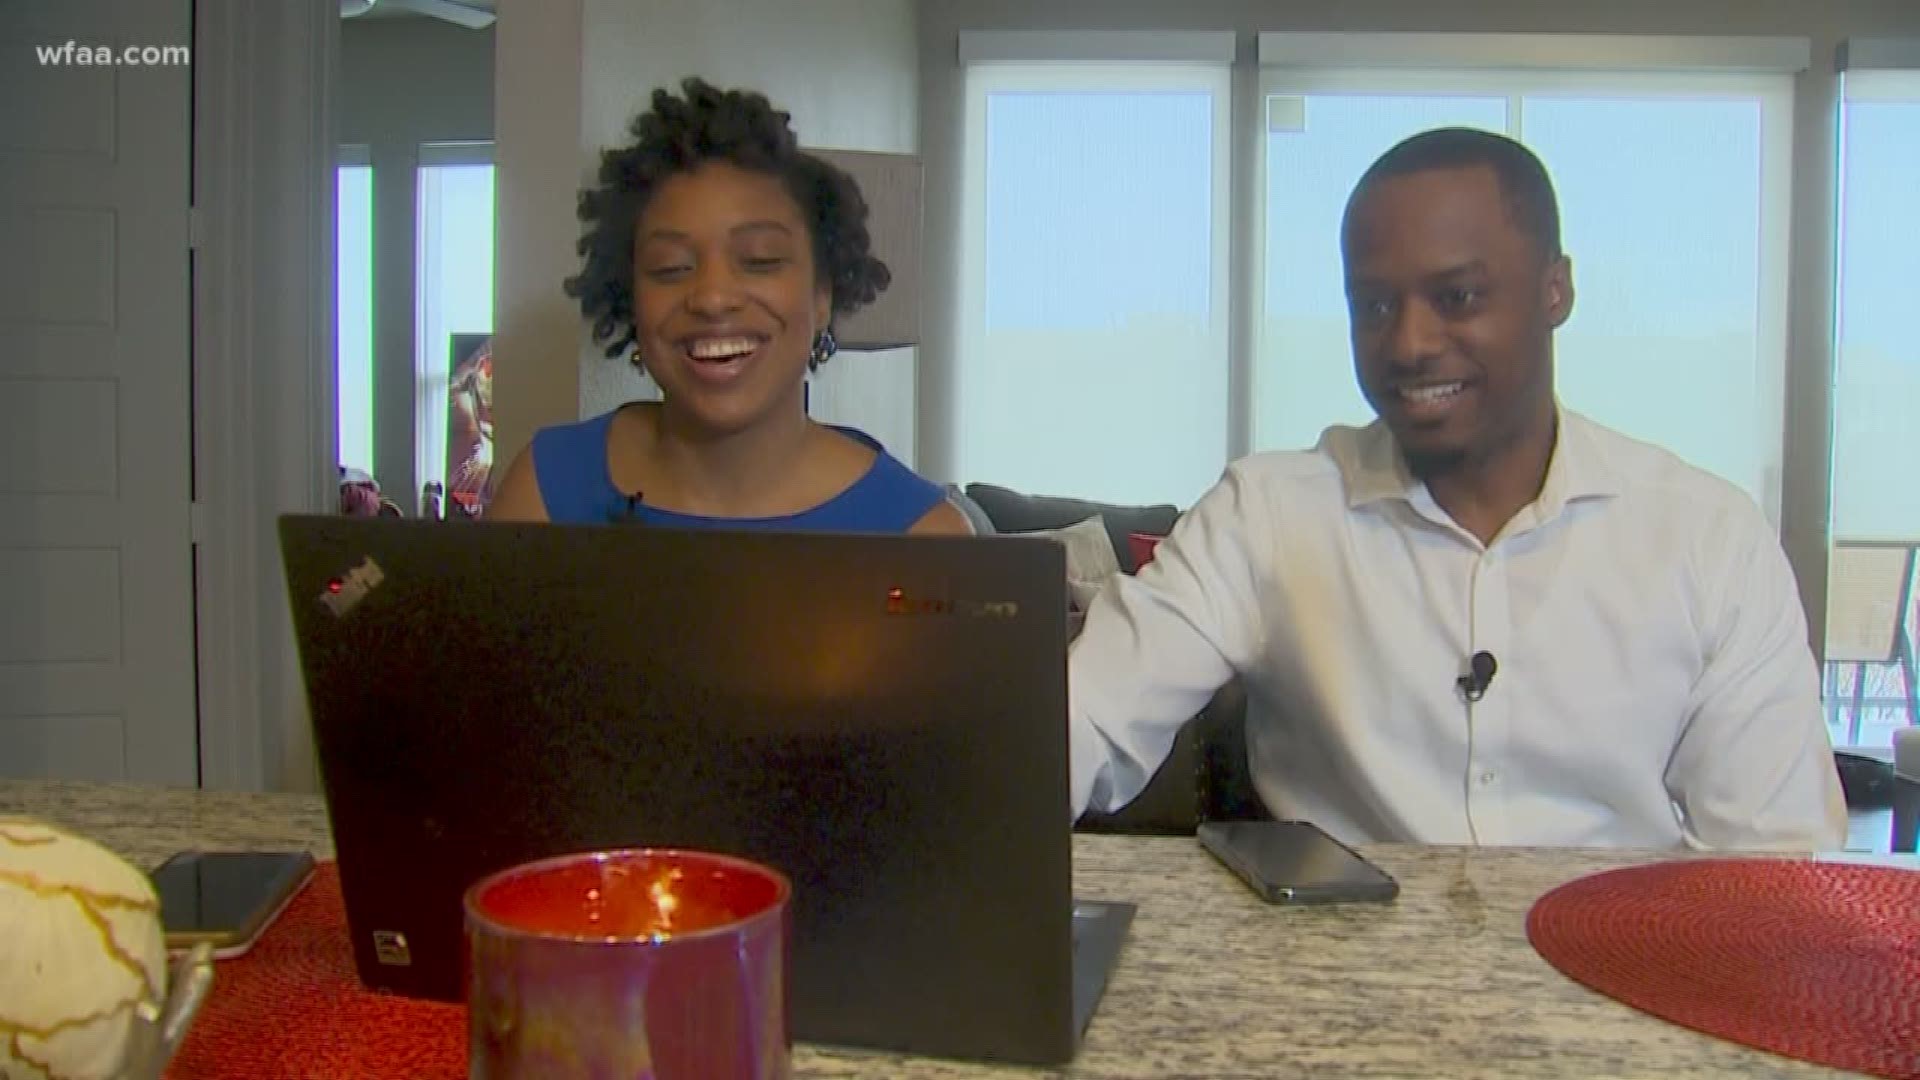 A Frisco, Texas couple says it's all about the side hustle.